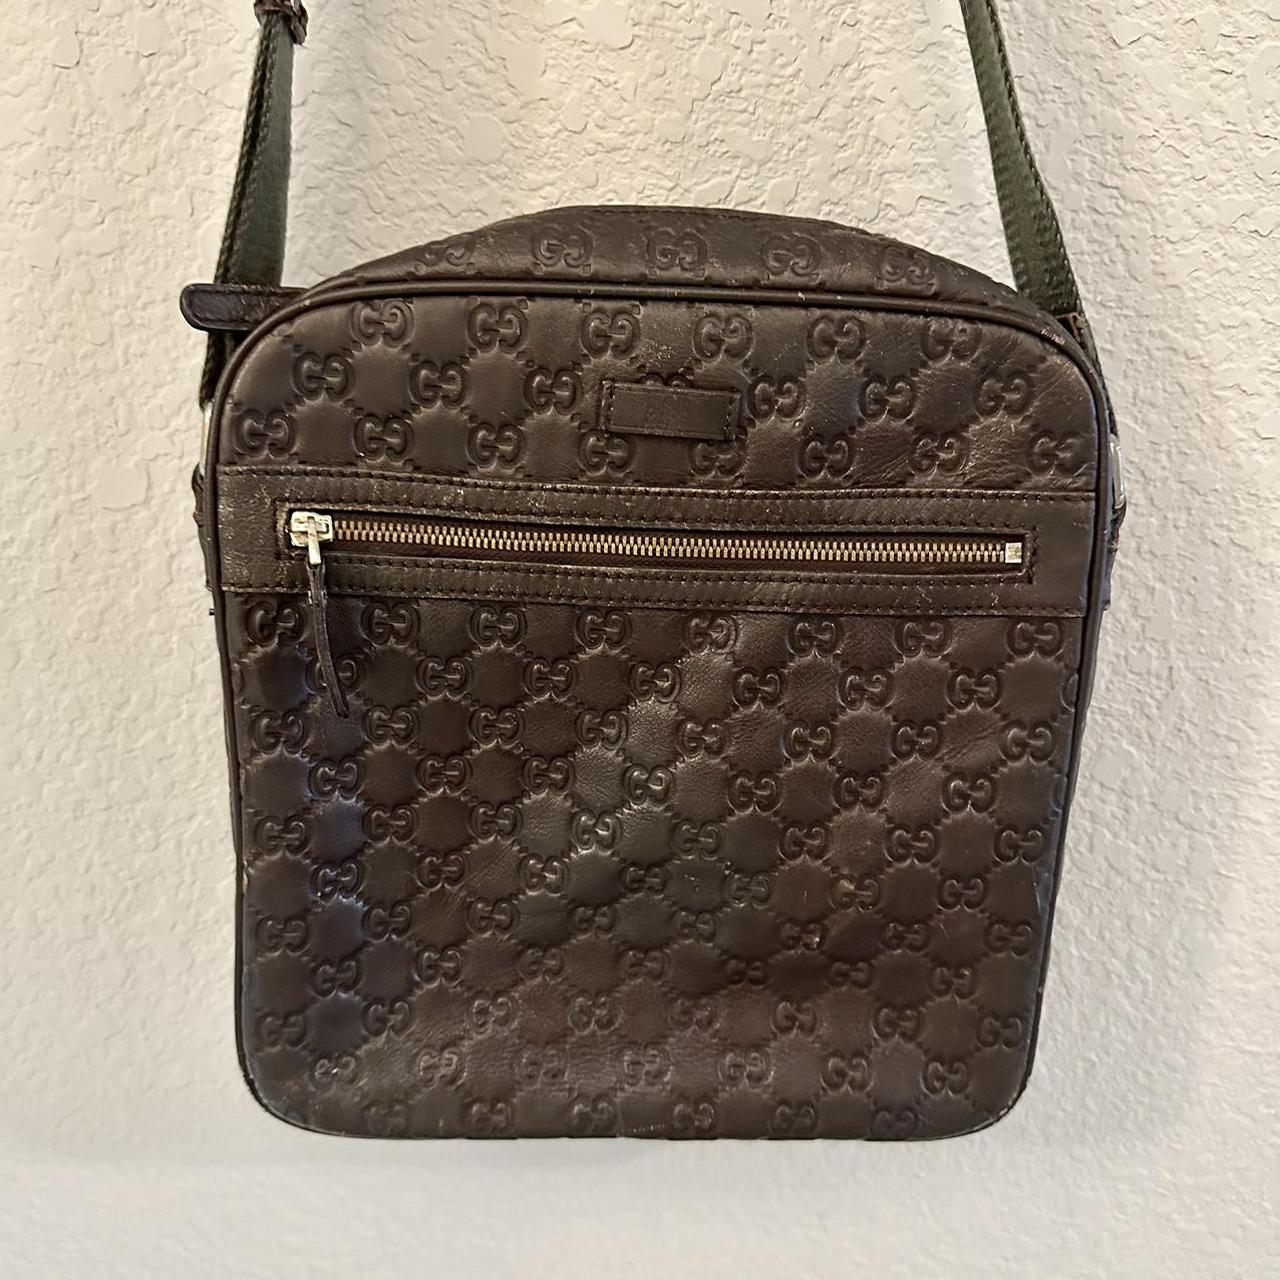 Gucci man bag Been used a few times but practically - Depop